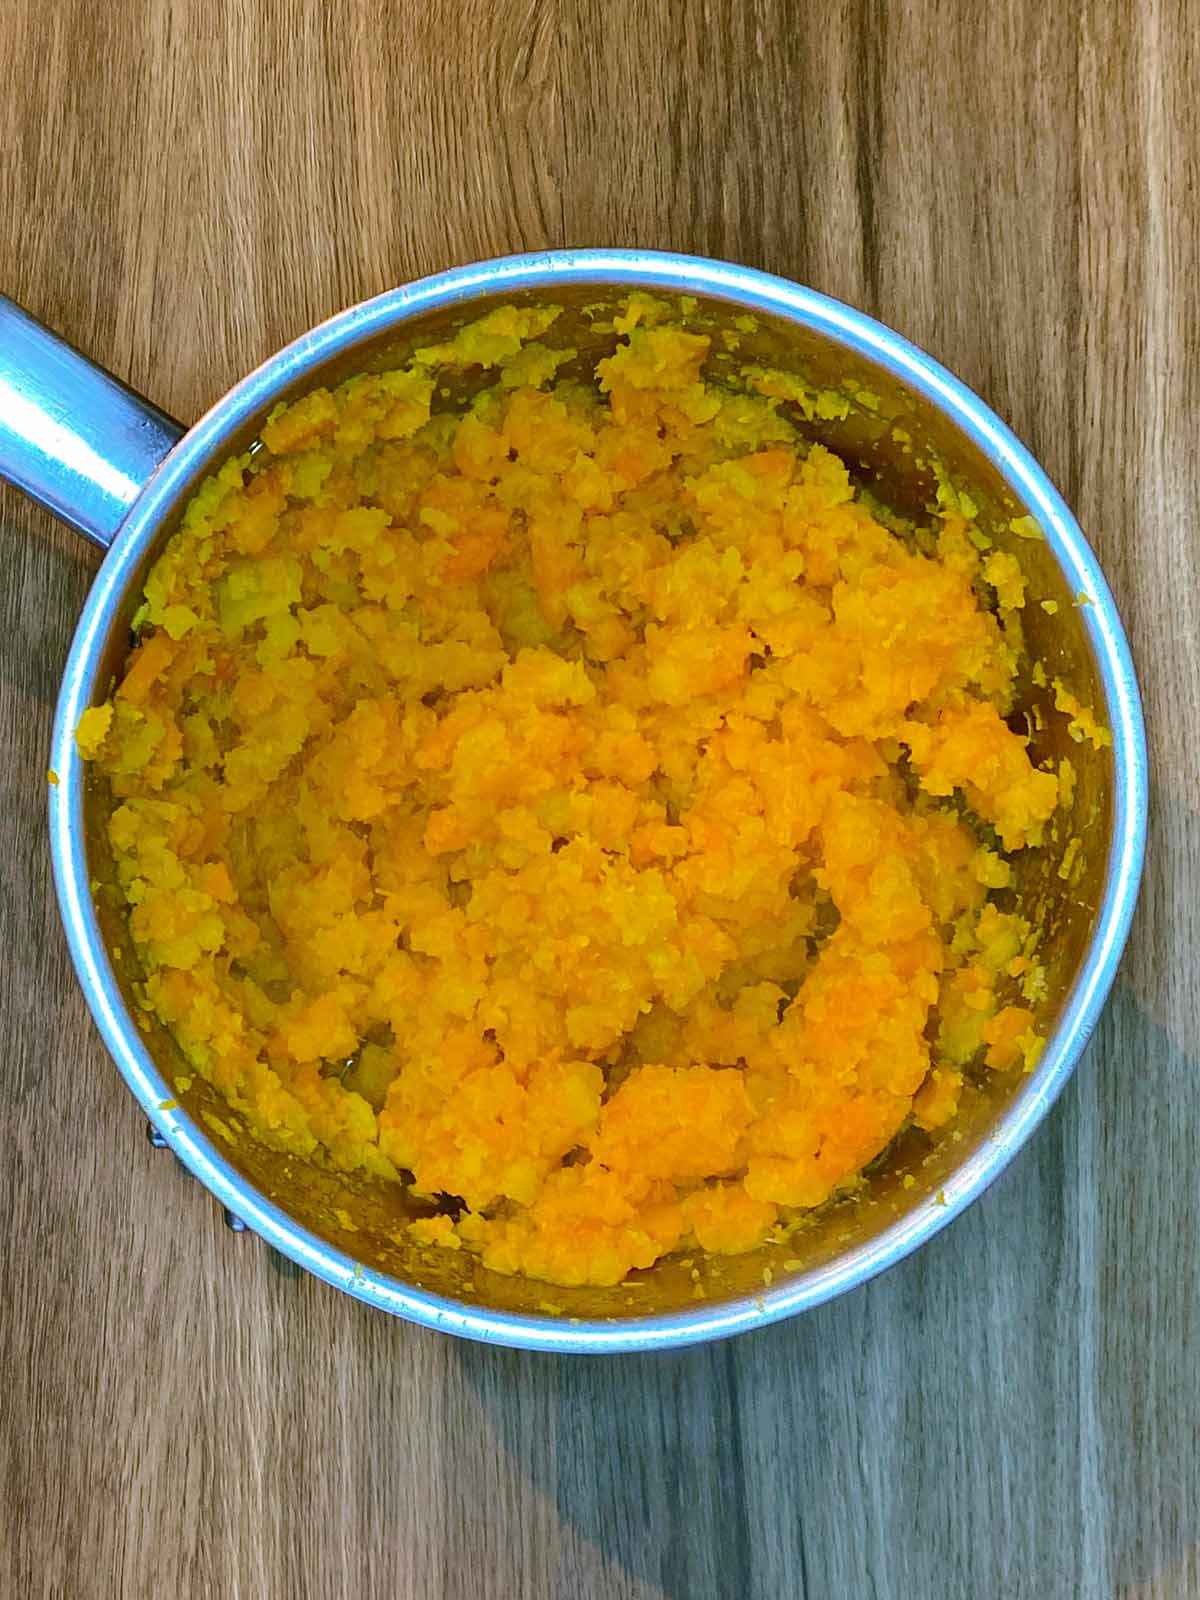 Mashed carrot and swede in a saucepan.